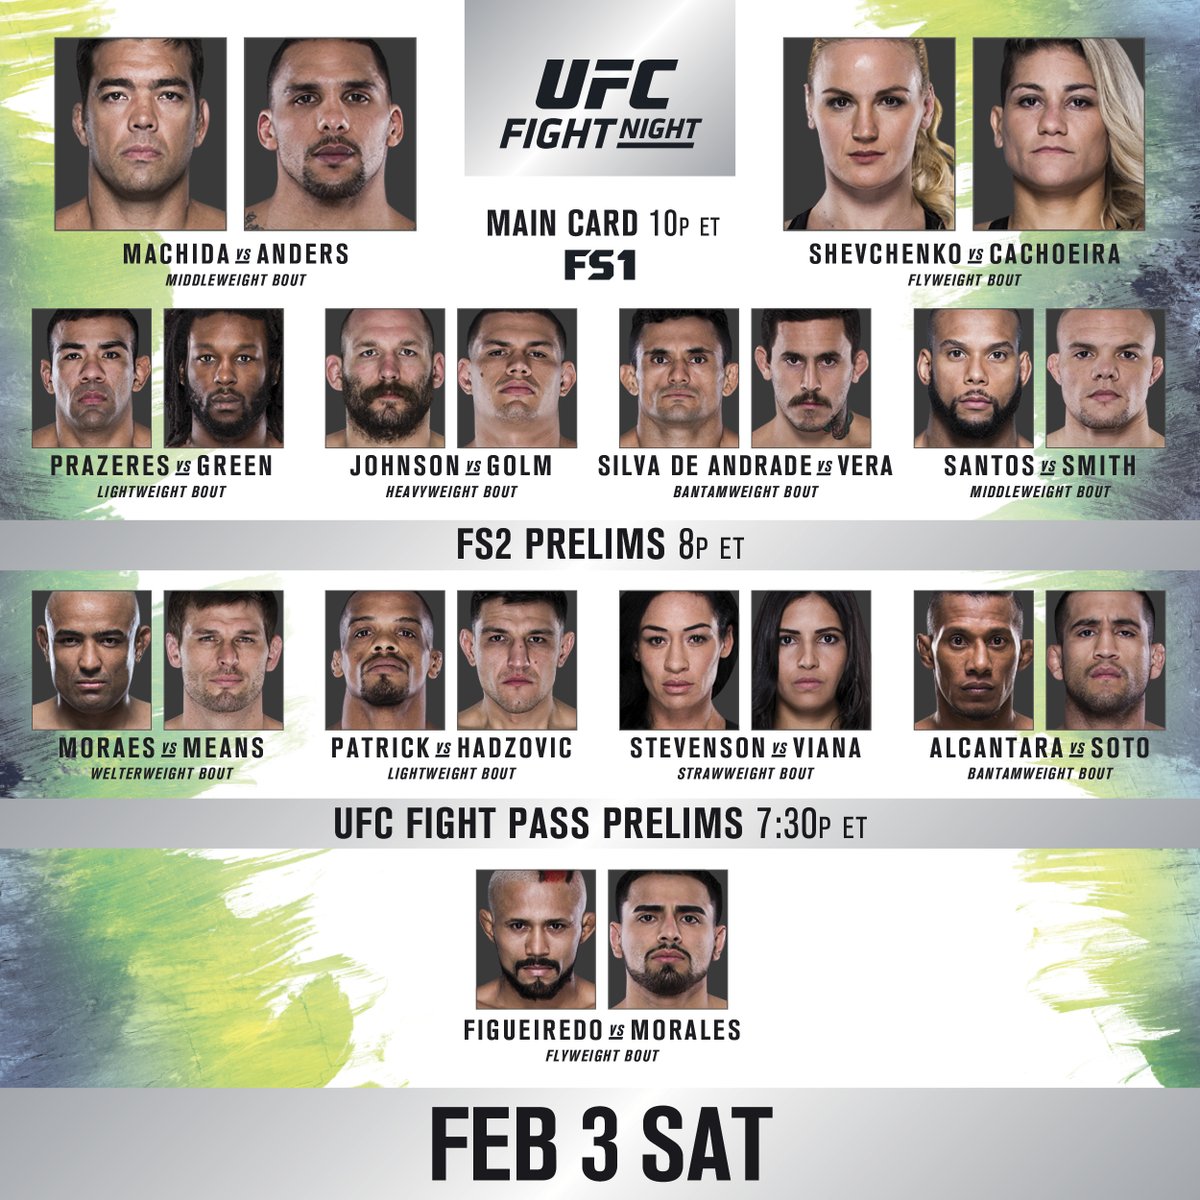 Pic: Poster for UFC Fight Night 125: 'Machida vs Anders' on Feb. 3